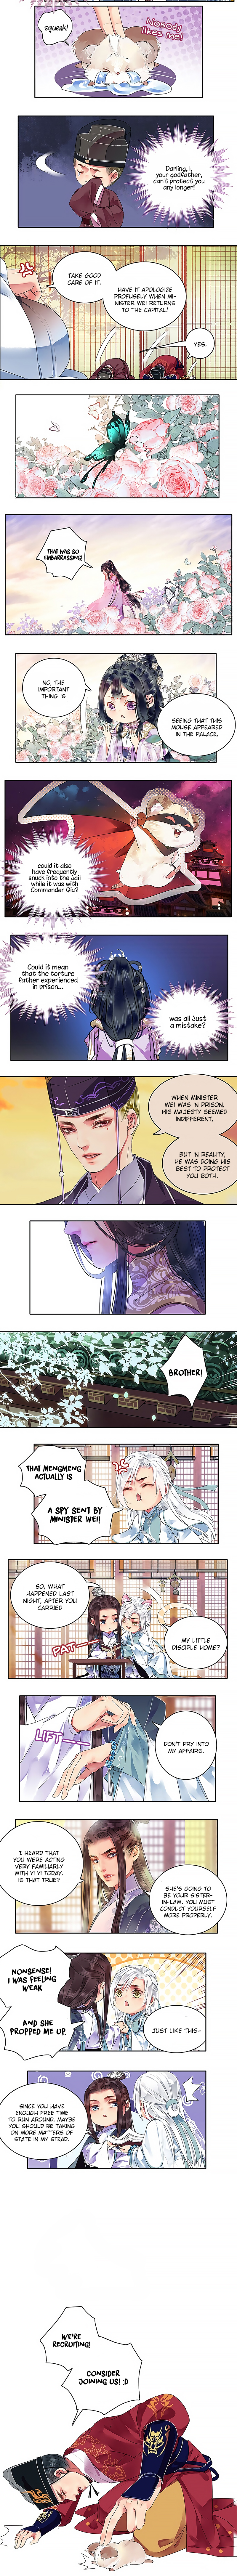 Princess In The Prince's Harem - Page 3